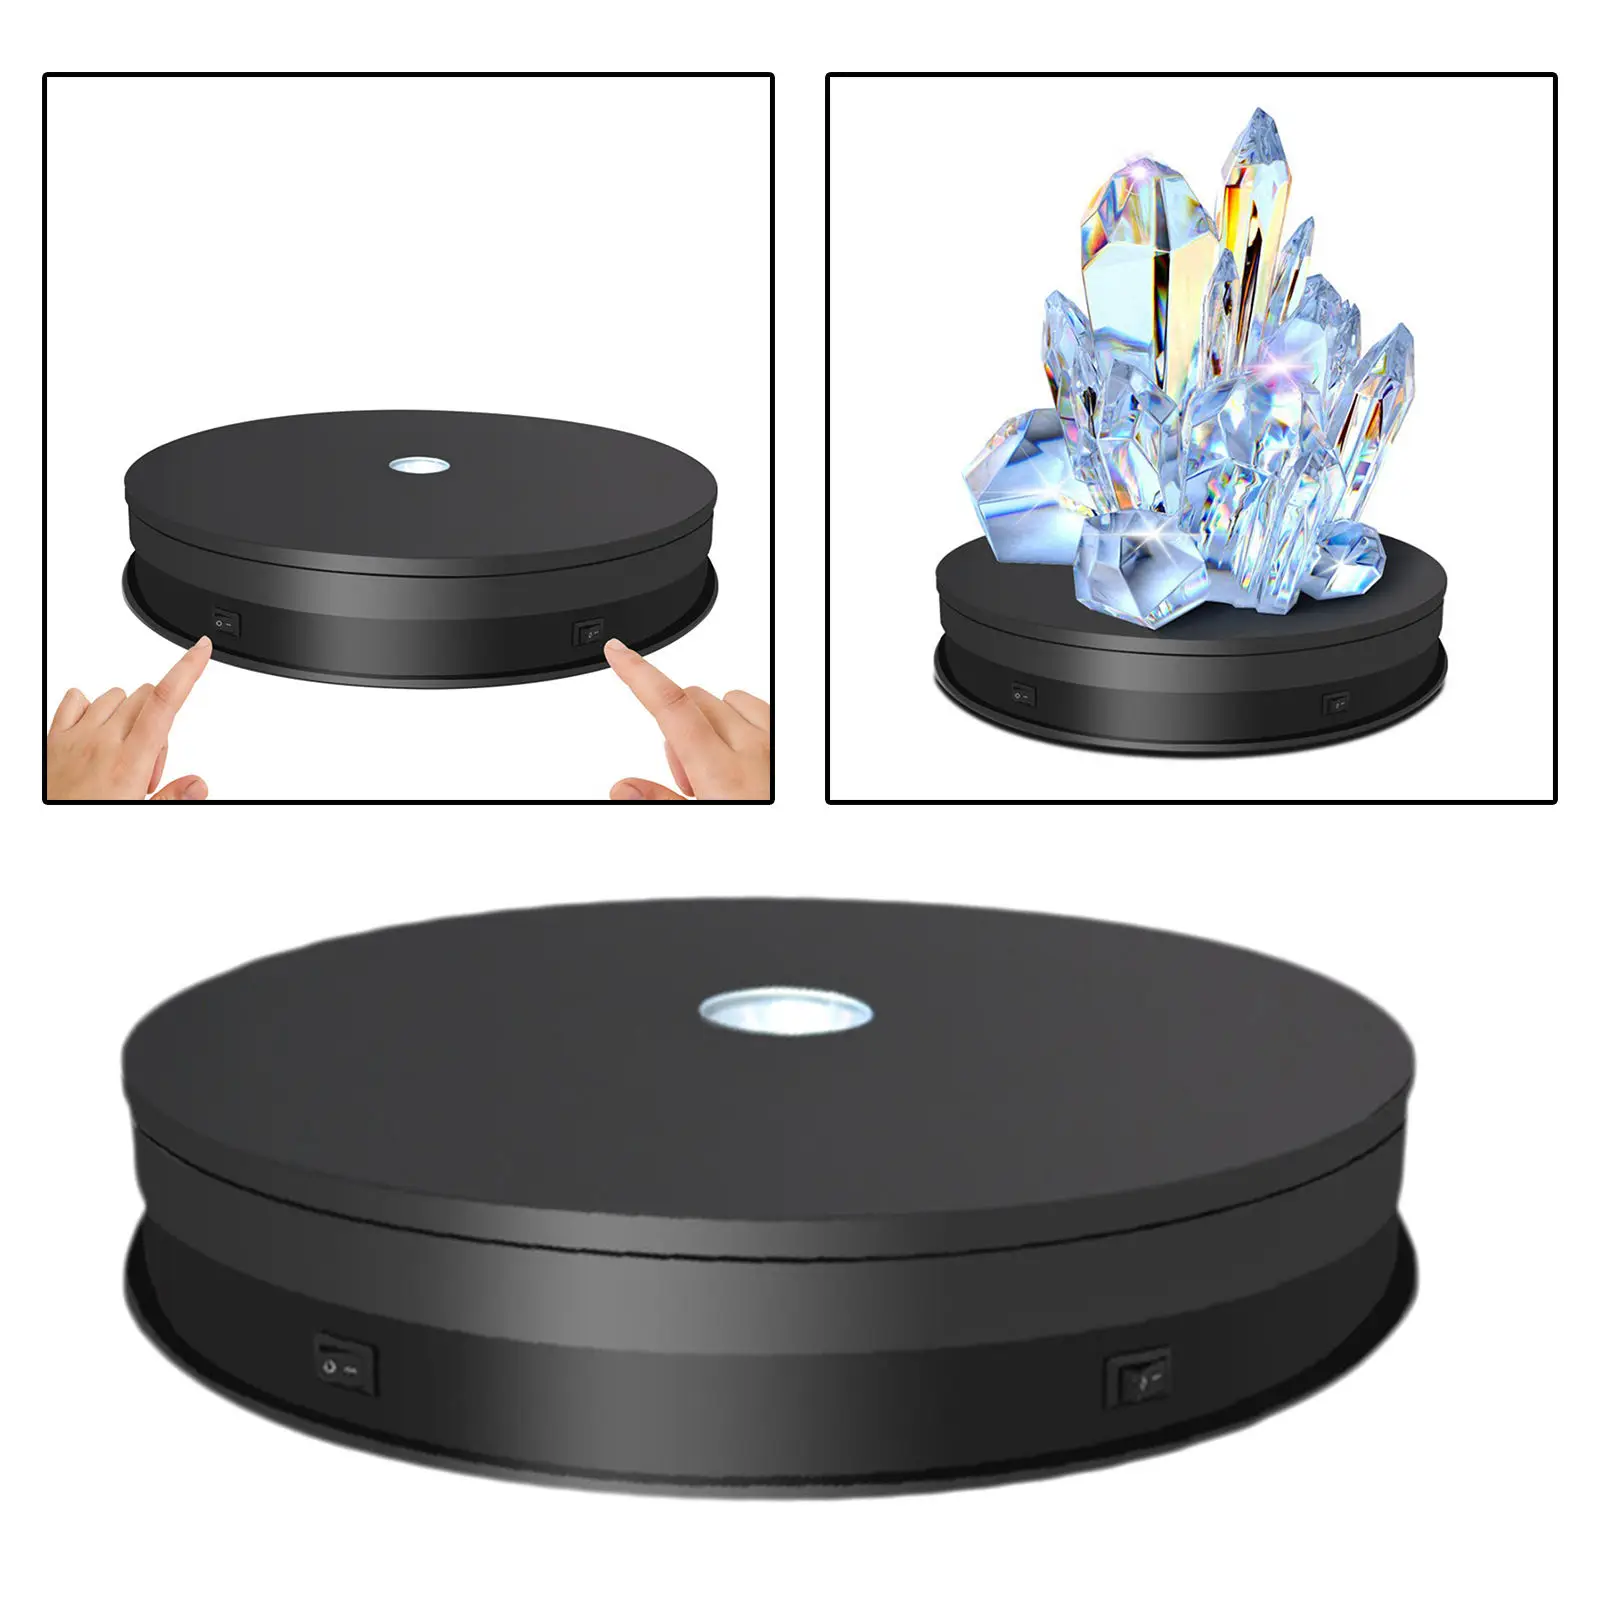 Stylish Top Electric Motorized Rotary Rotating Display Turntable Max Load 25kg for Jewelry Model Display Stand